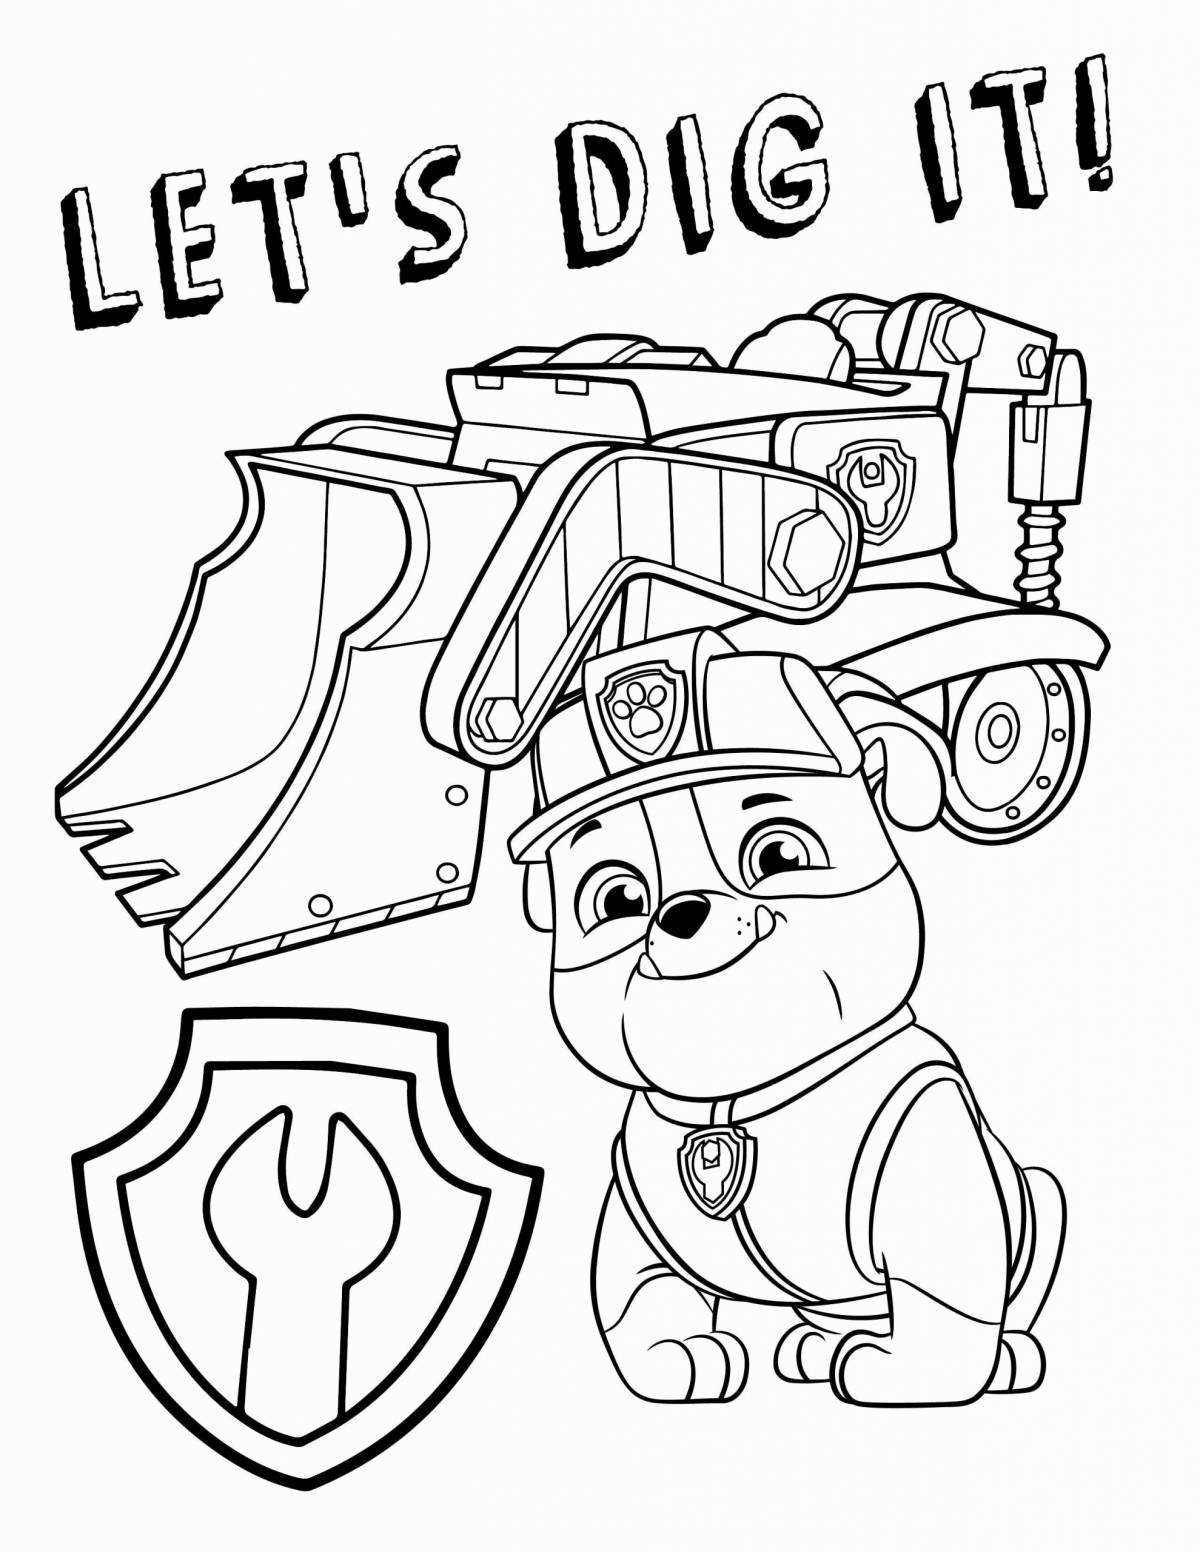 Coloring page gorgeous paw patrol tower